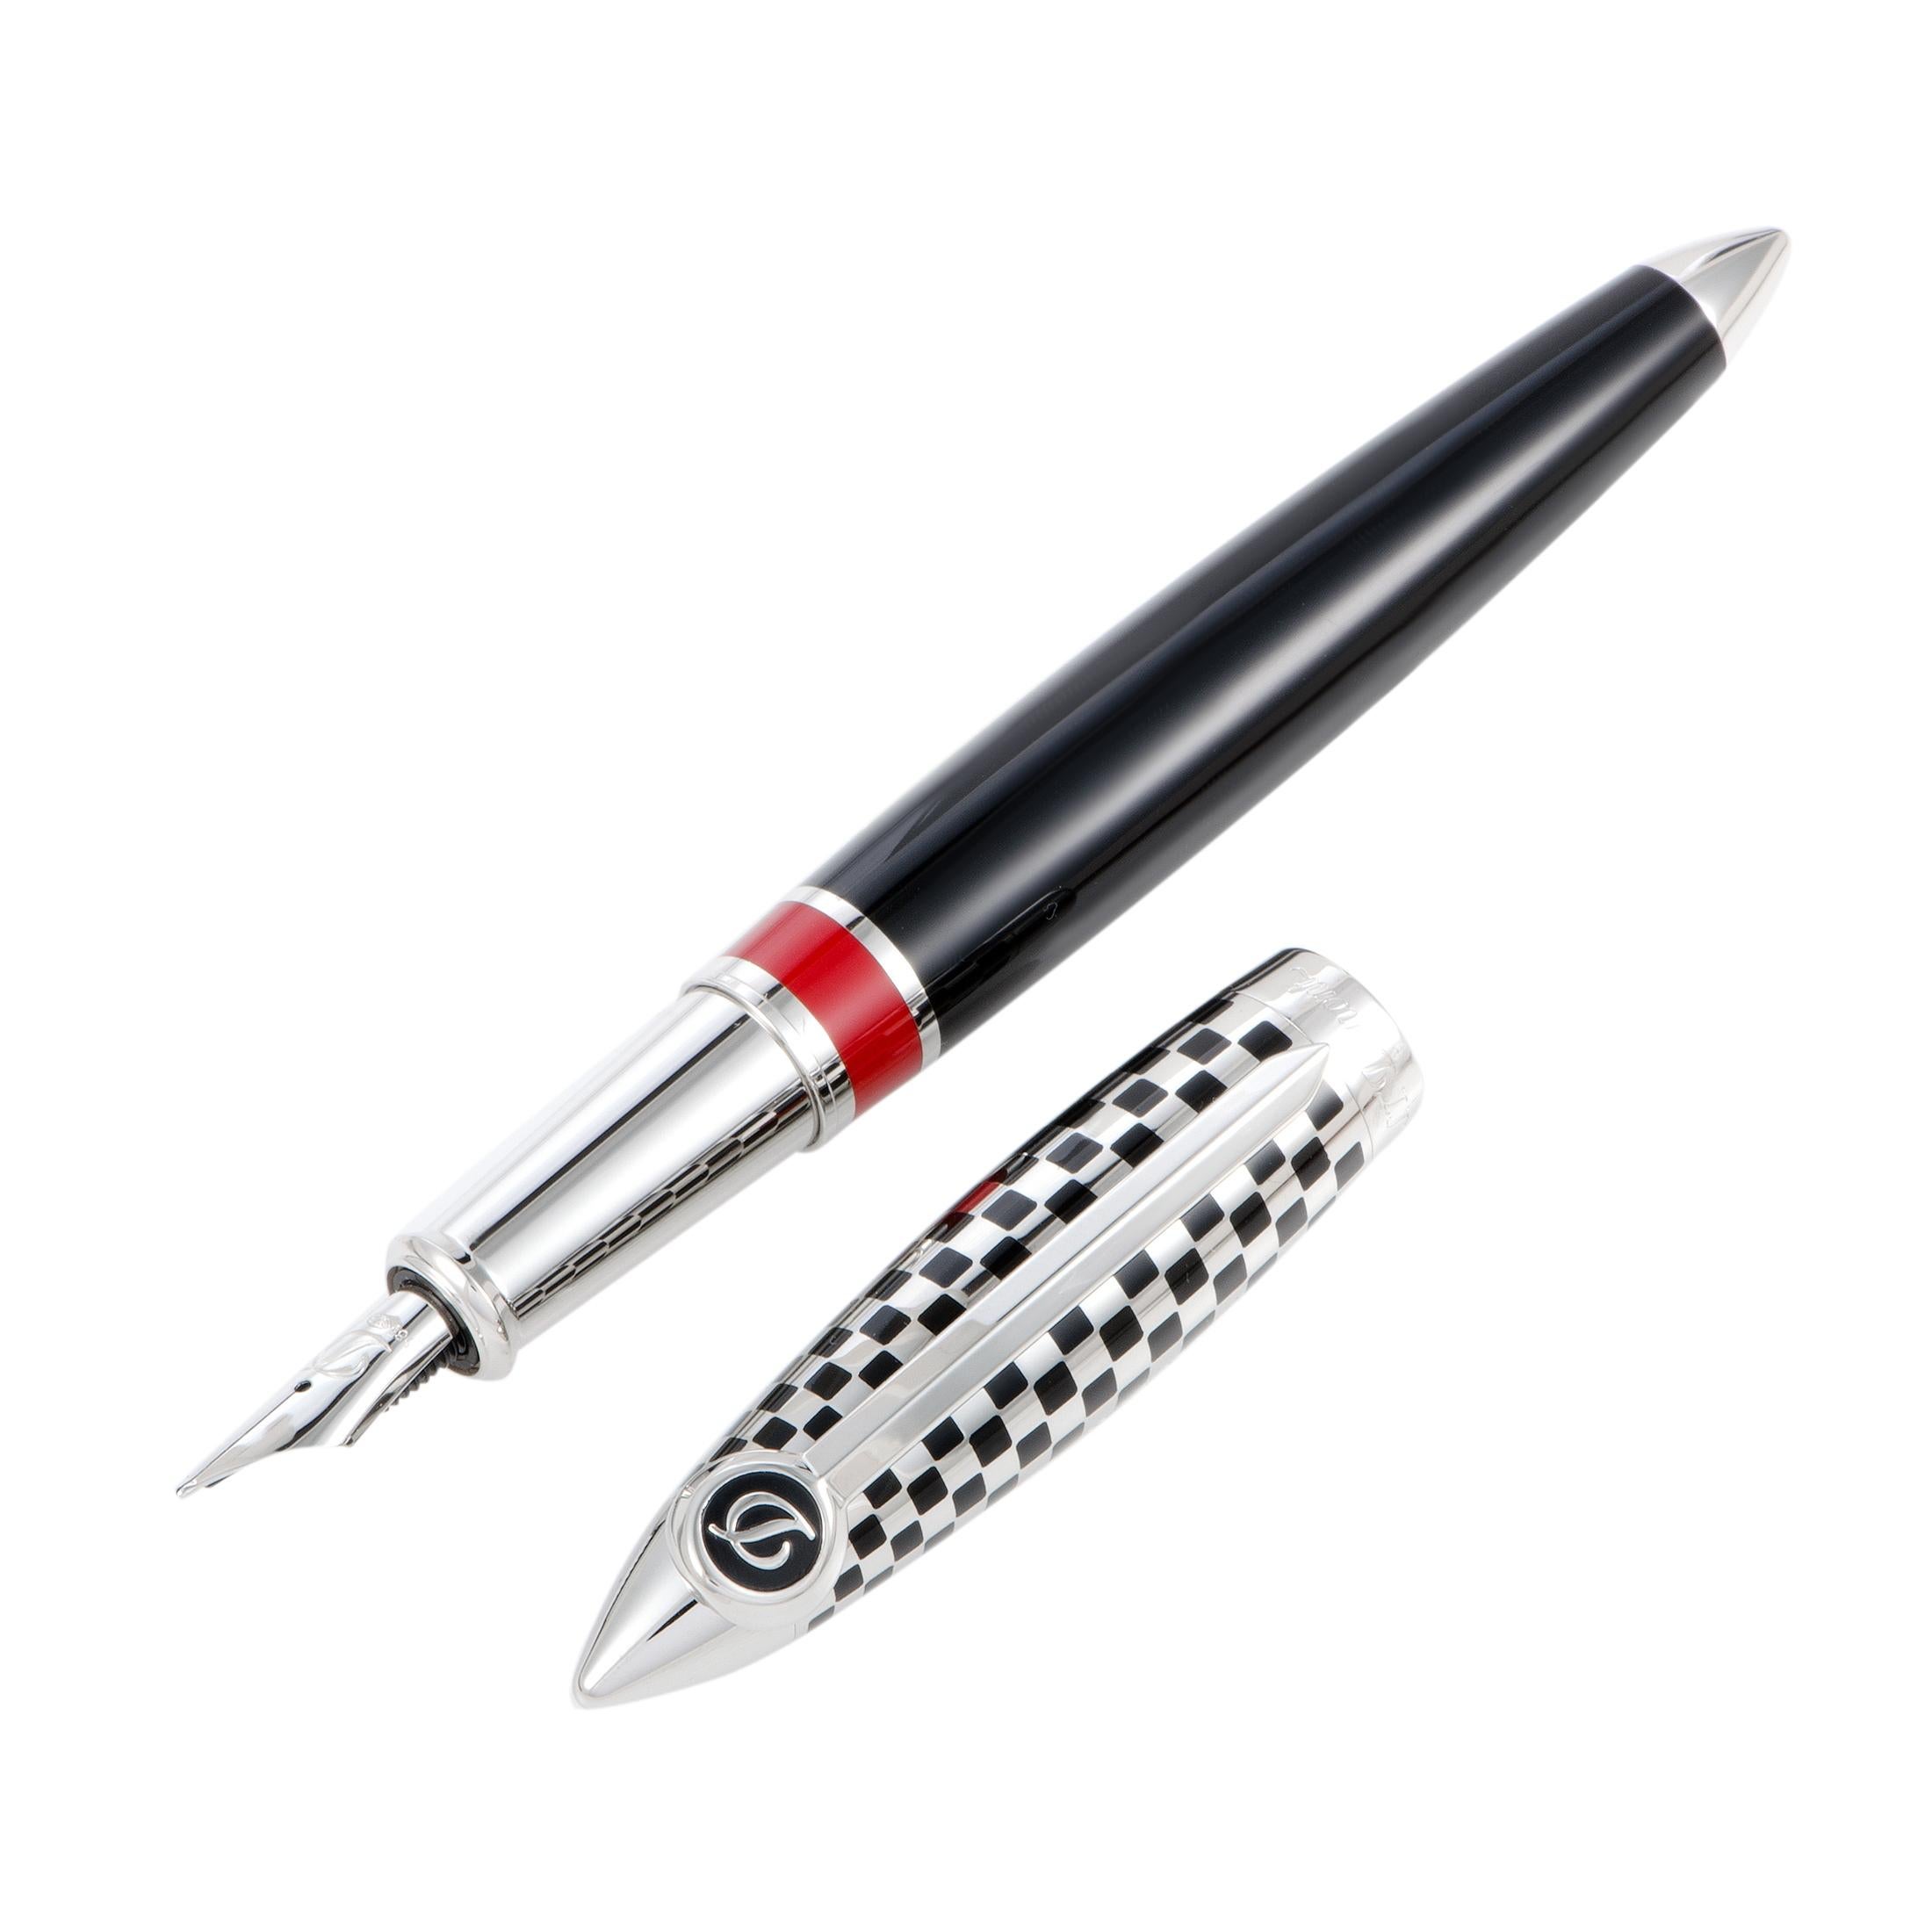 Envisioned as a noteworthy tribute to the adventurous world of racing, this striking limited edition fountain pen from S.T. Dupont showcases the brand’s exquisite craftsmanship as well as their incessant inspiration and daring